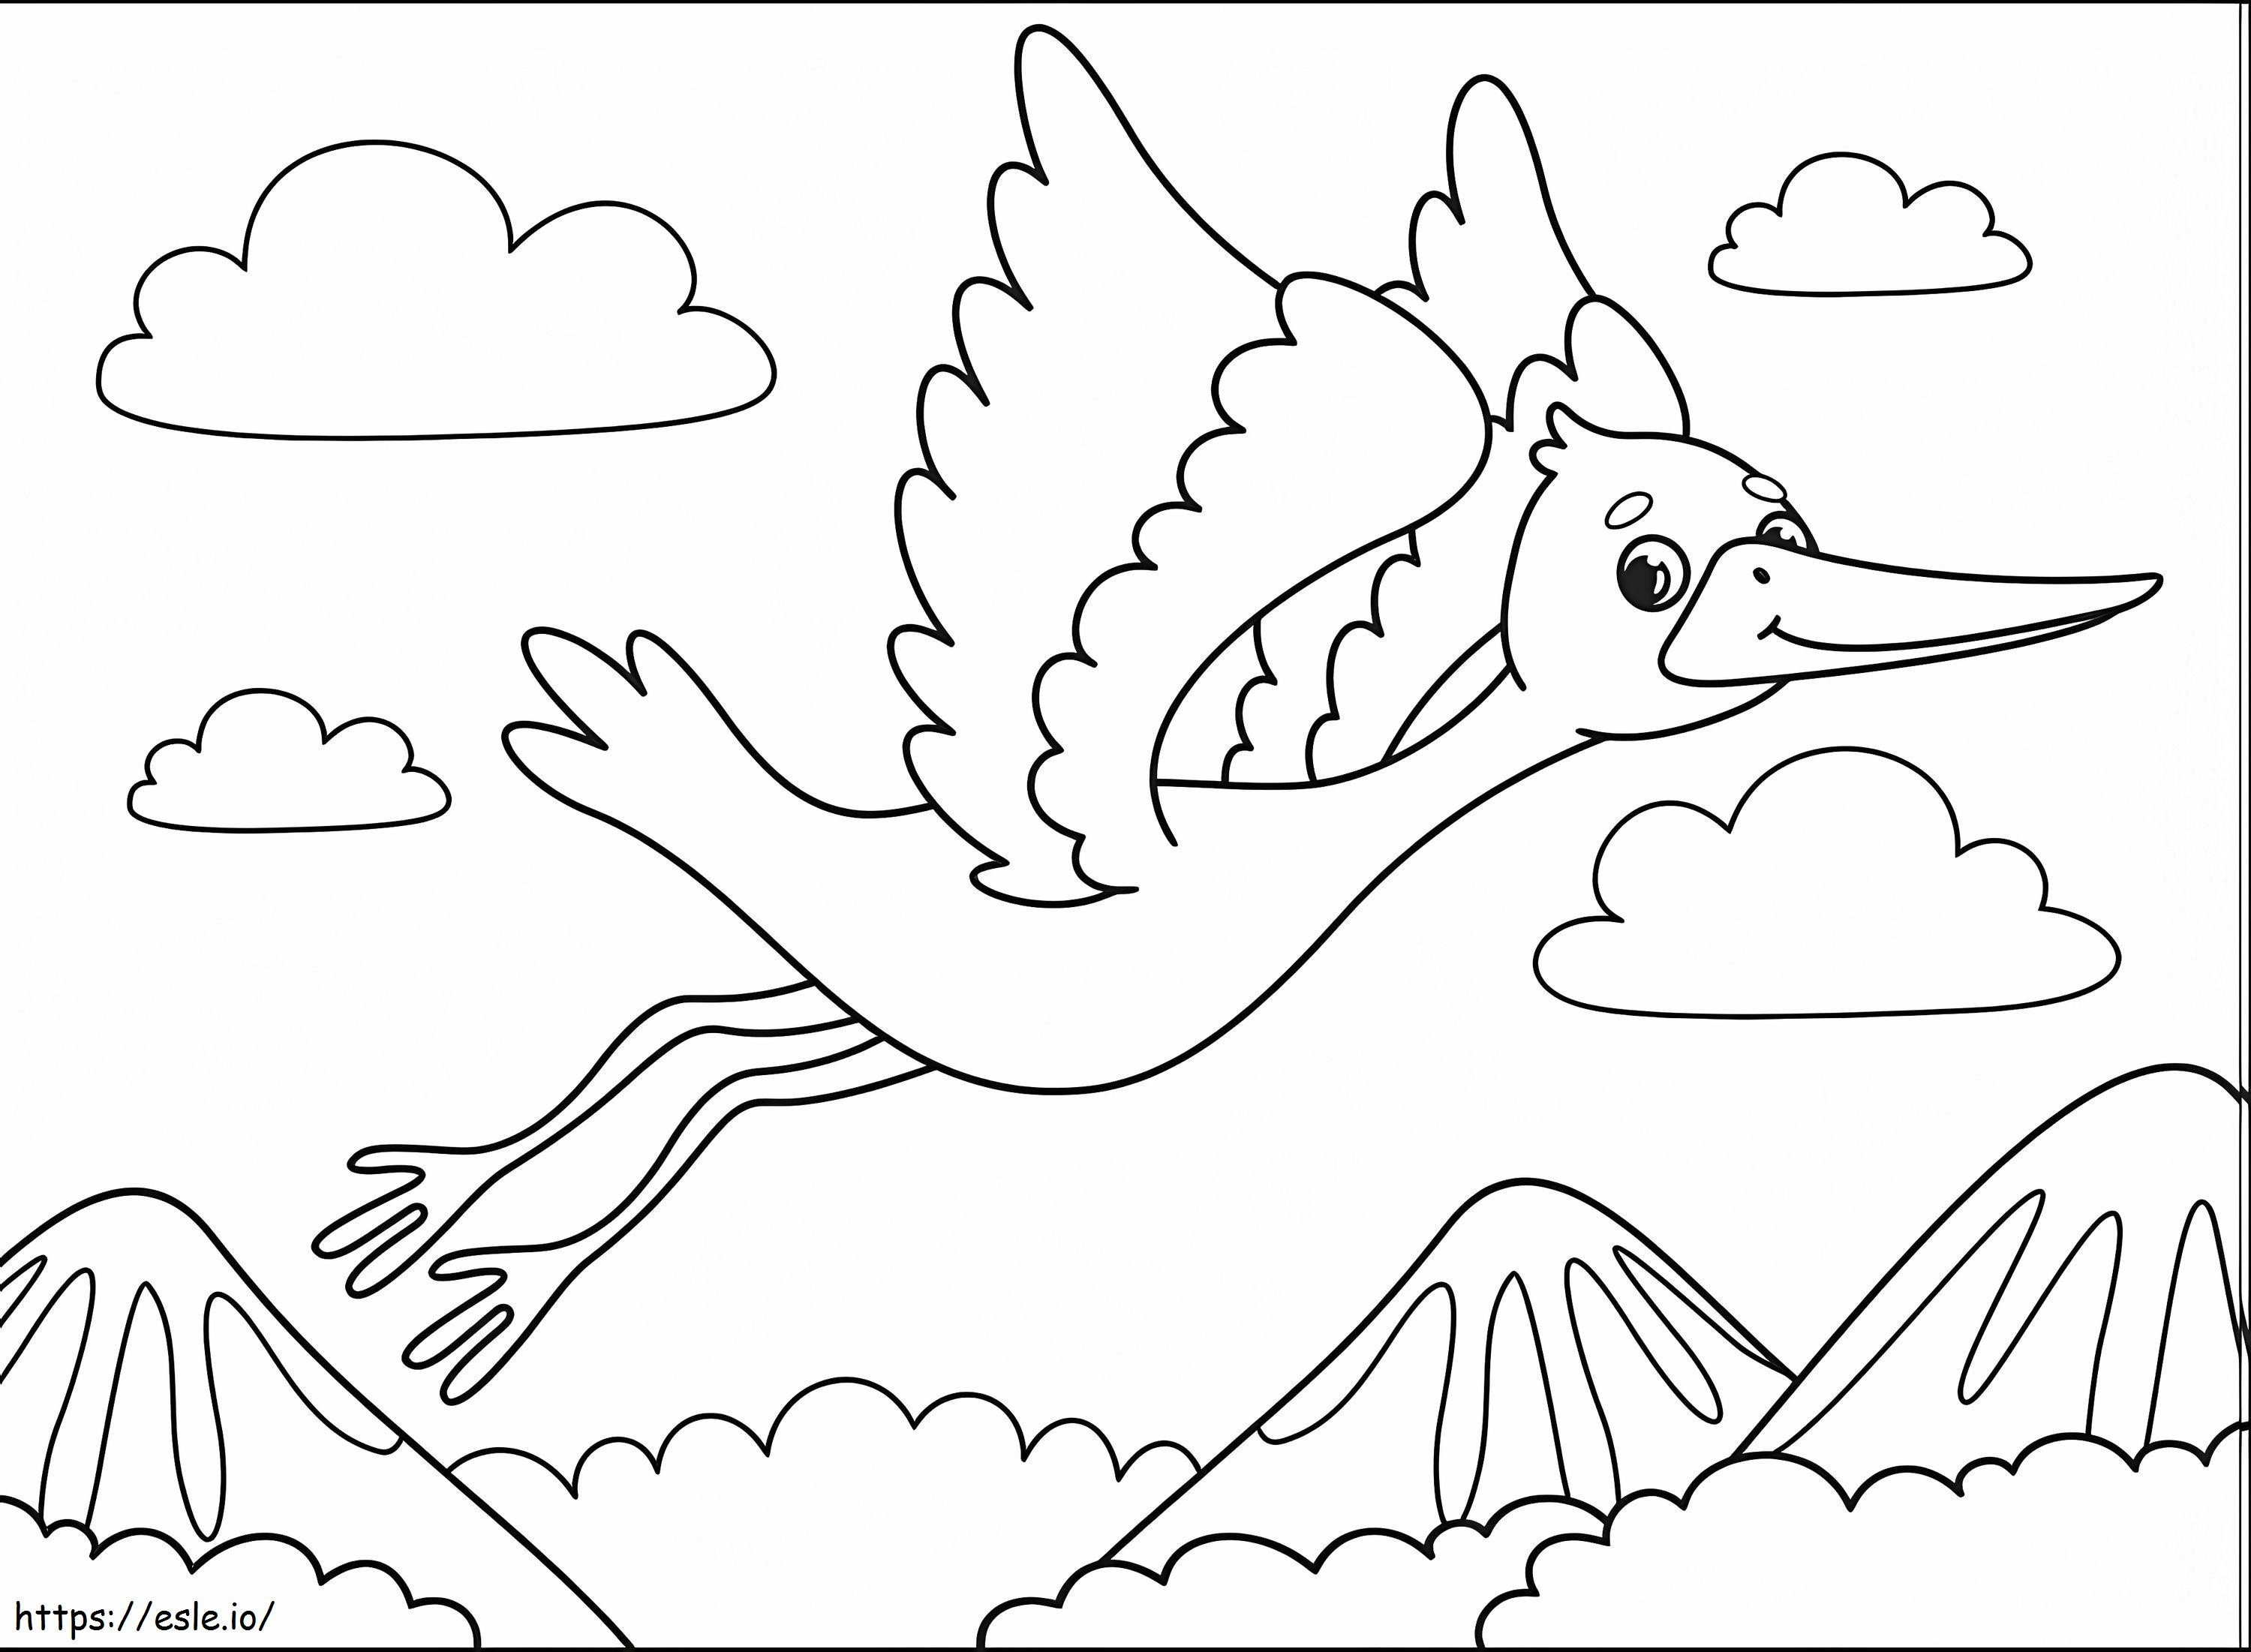 Happy Stork coloring page